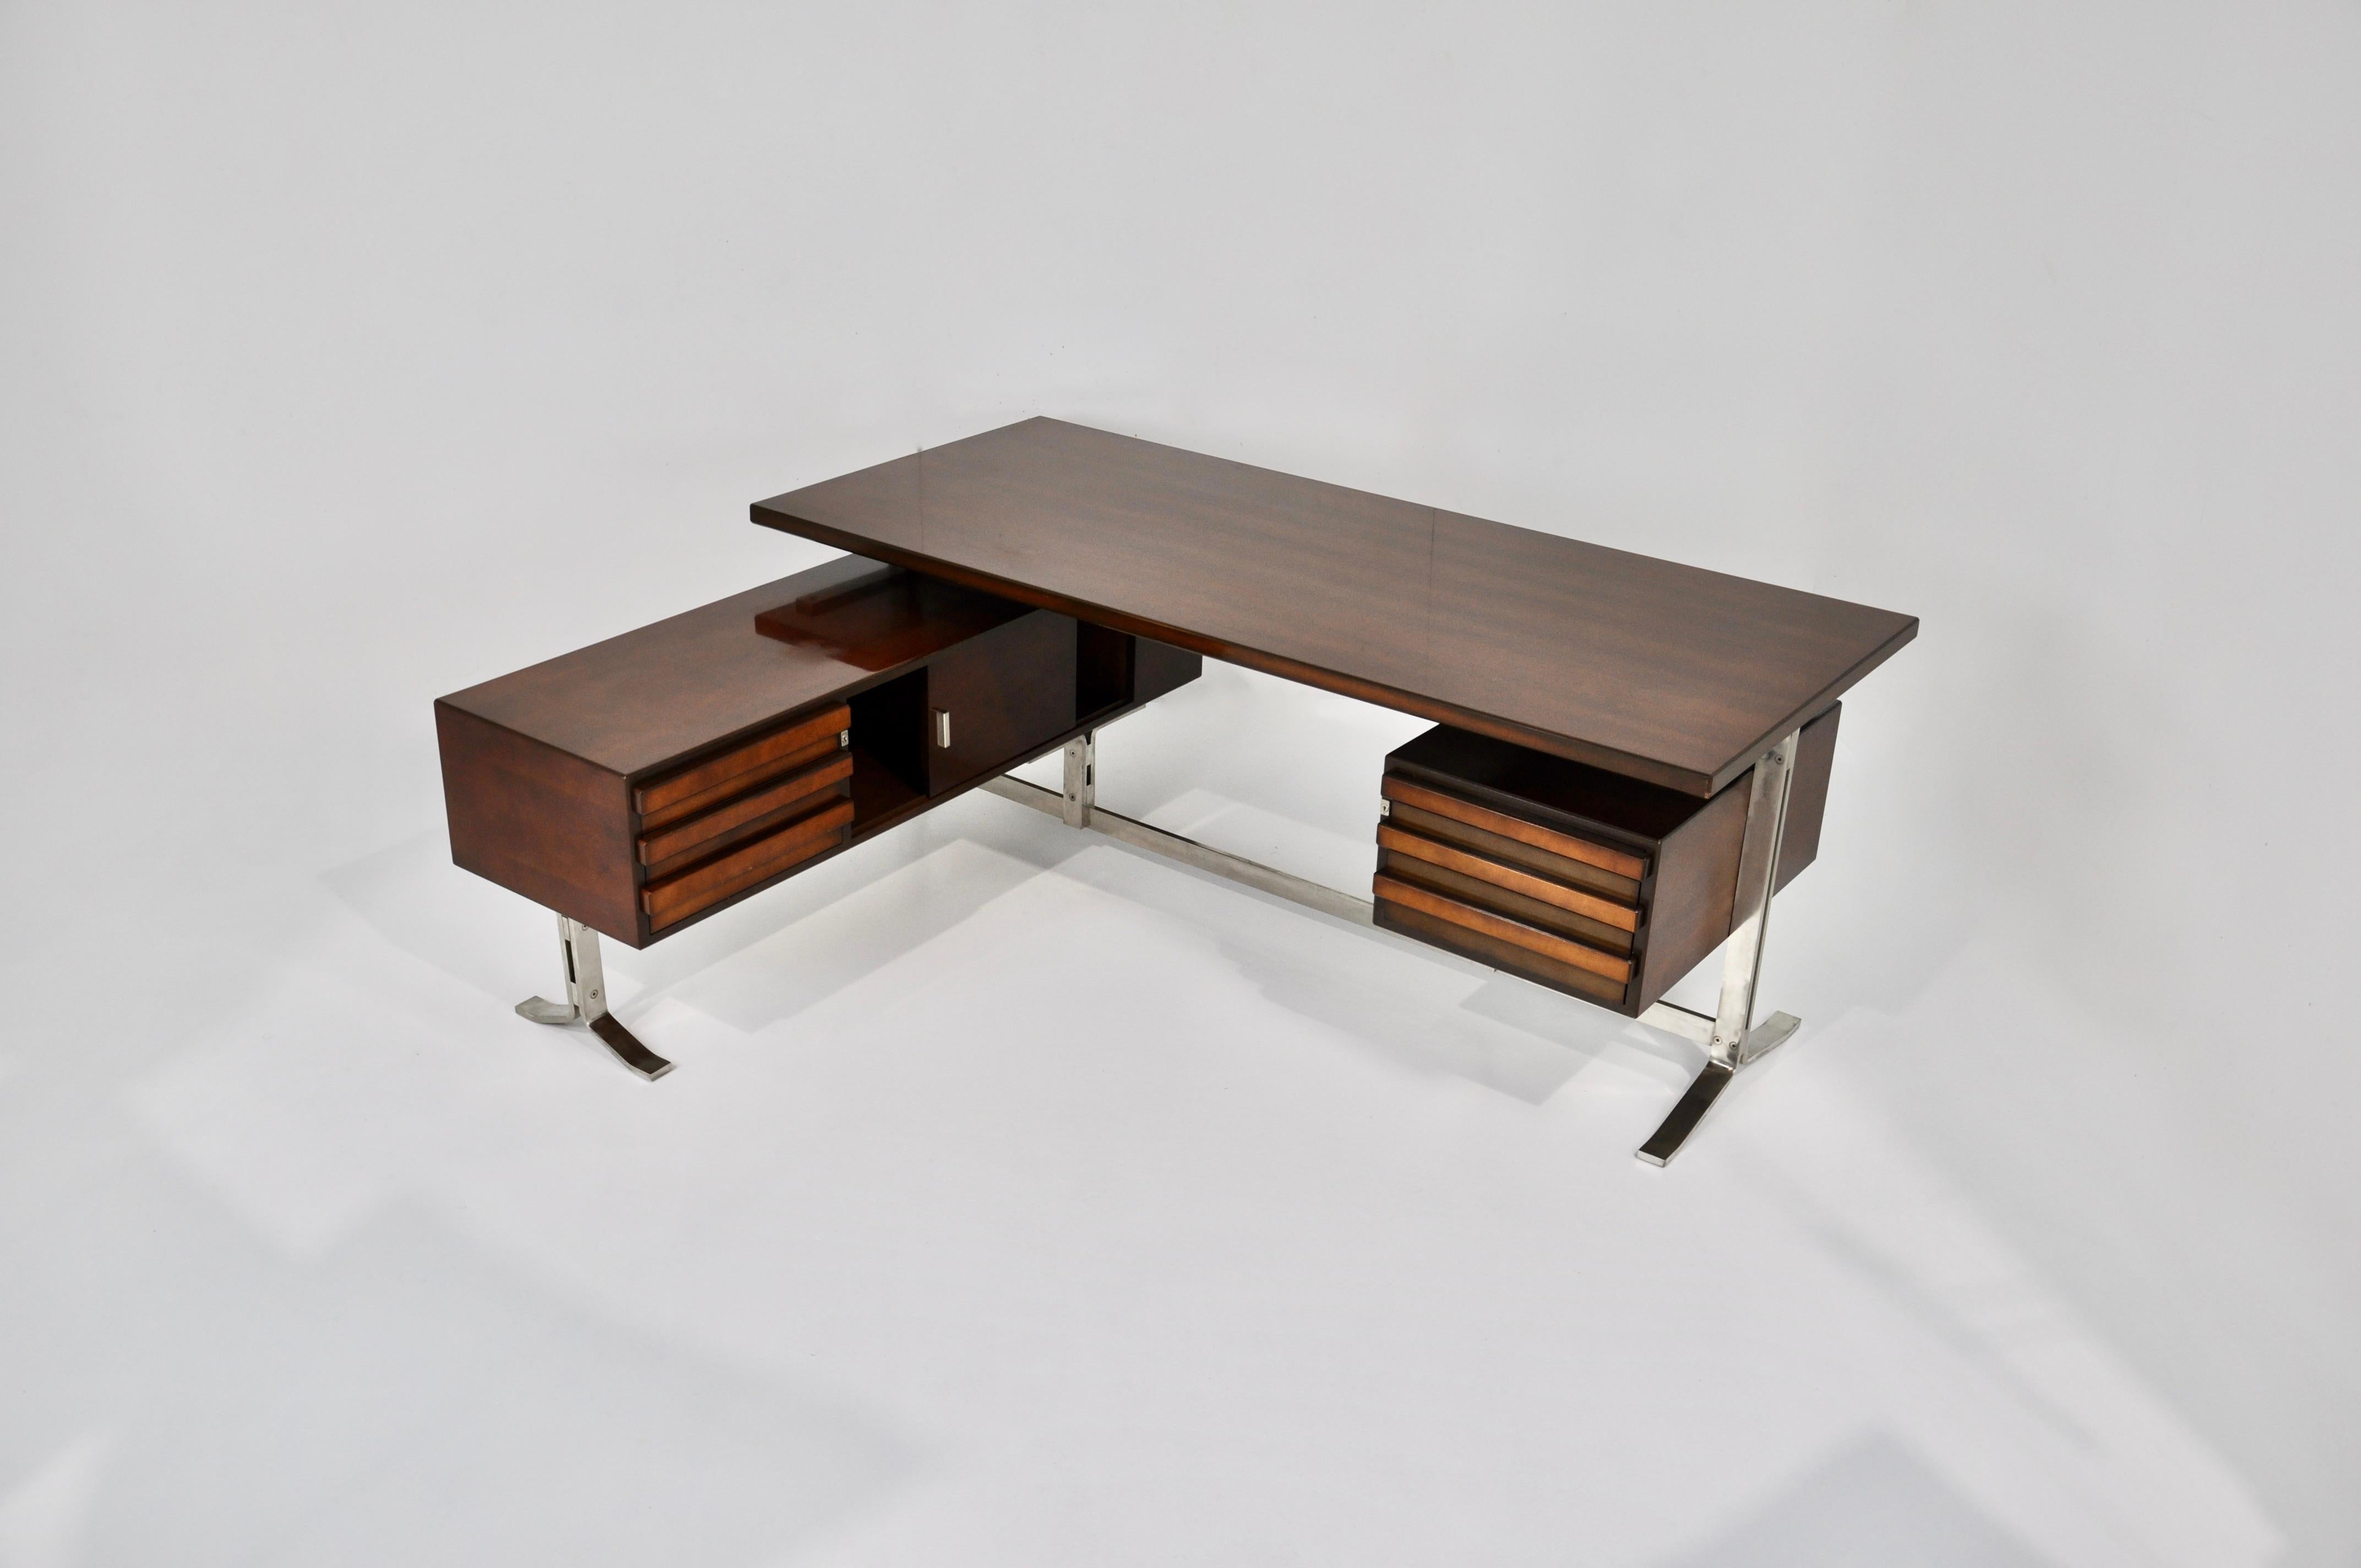 Wooden desk with metal legs. It consists of a pedestal with 3 storage drawers and a sliding door and a pedestal with a large drawer containing document dividers. Stamped Formanova (see pictures)
Wear due to time and age of the desk.